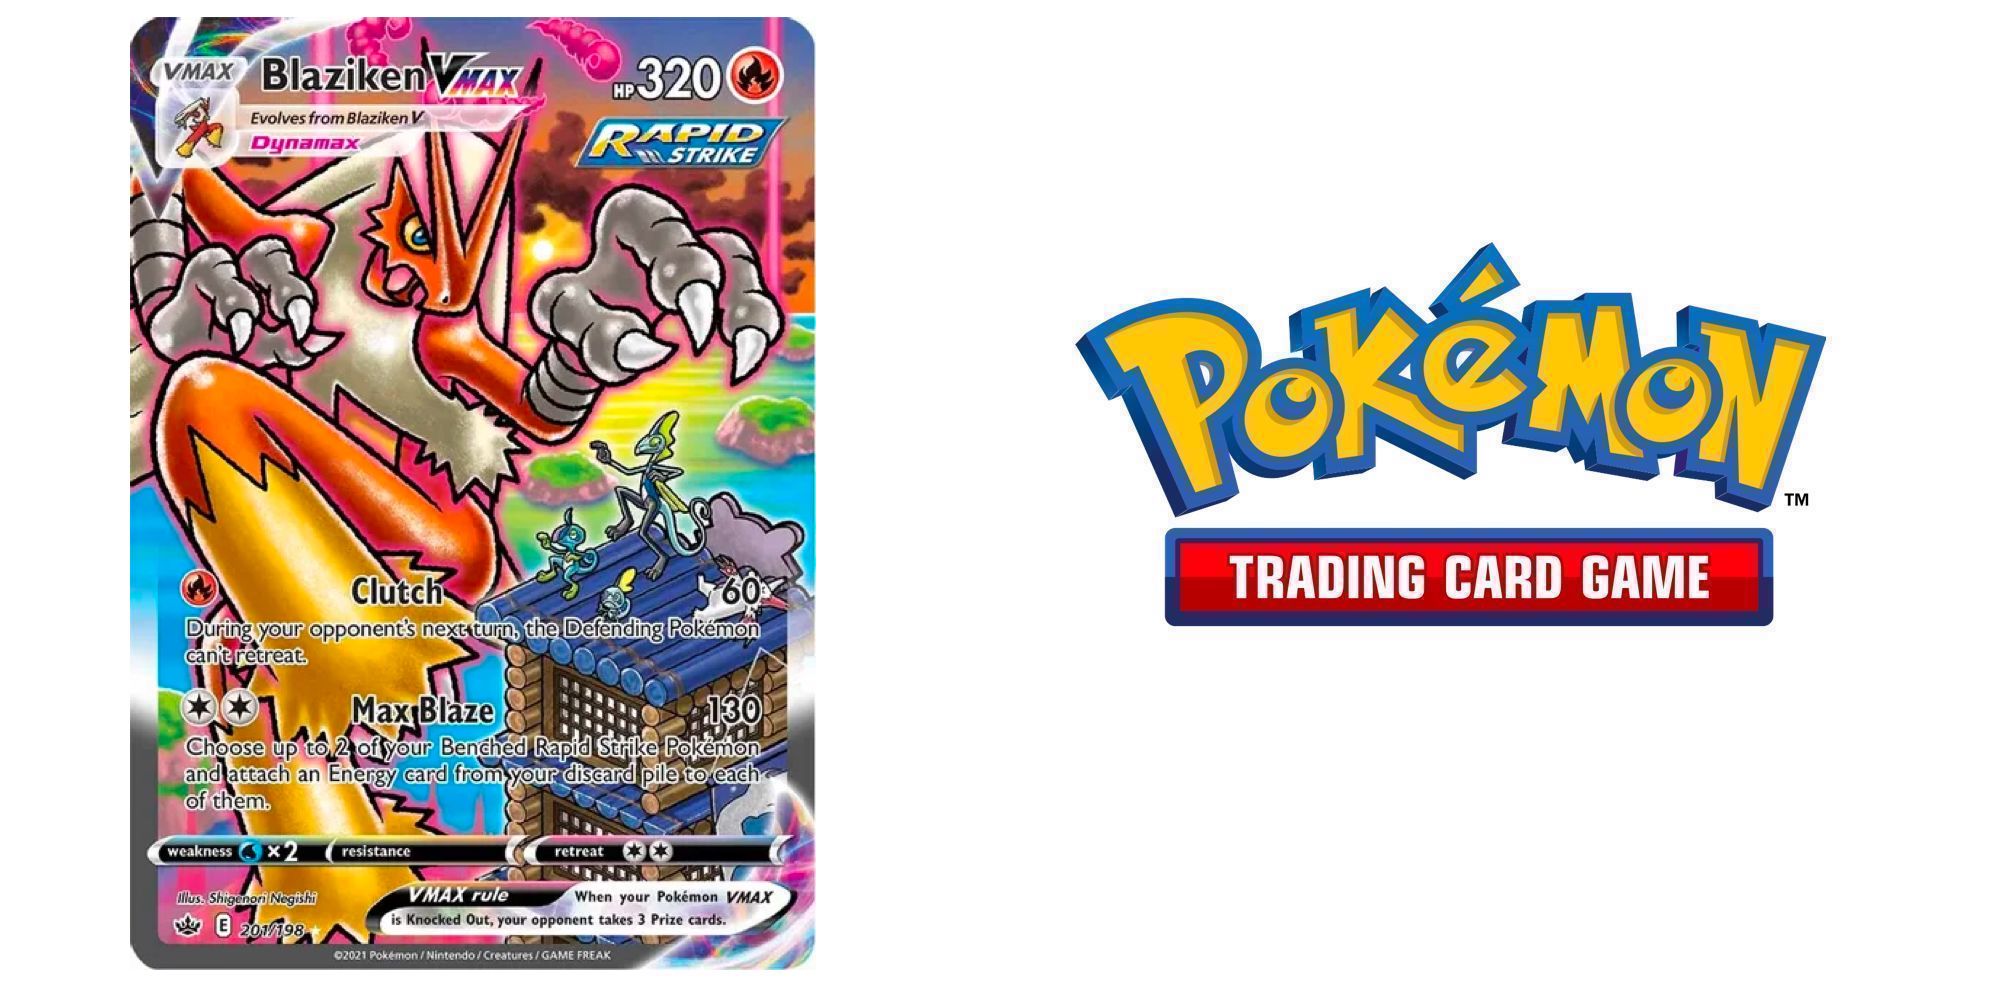 Opening a Booster Box of Pokémon TCG: Evolving Skies: Early Review